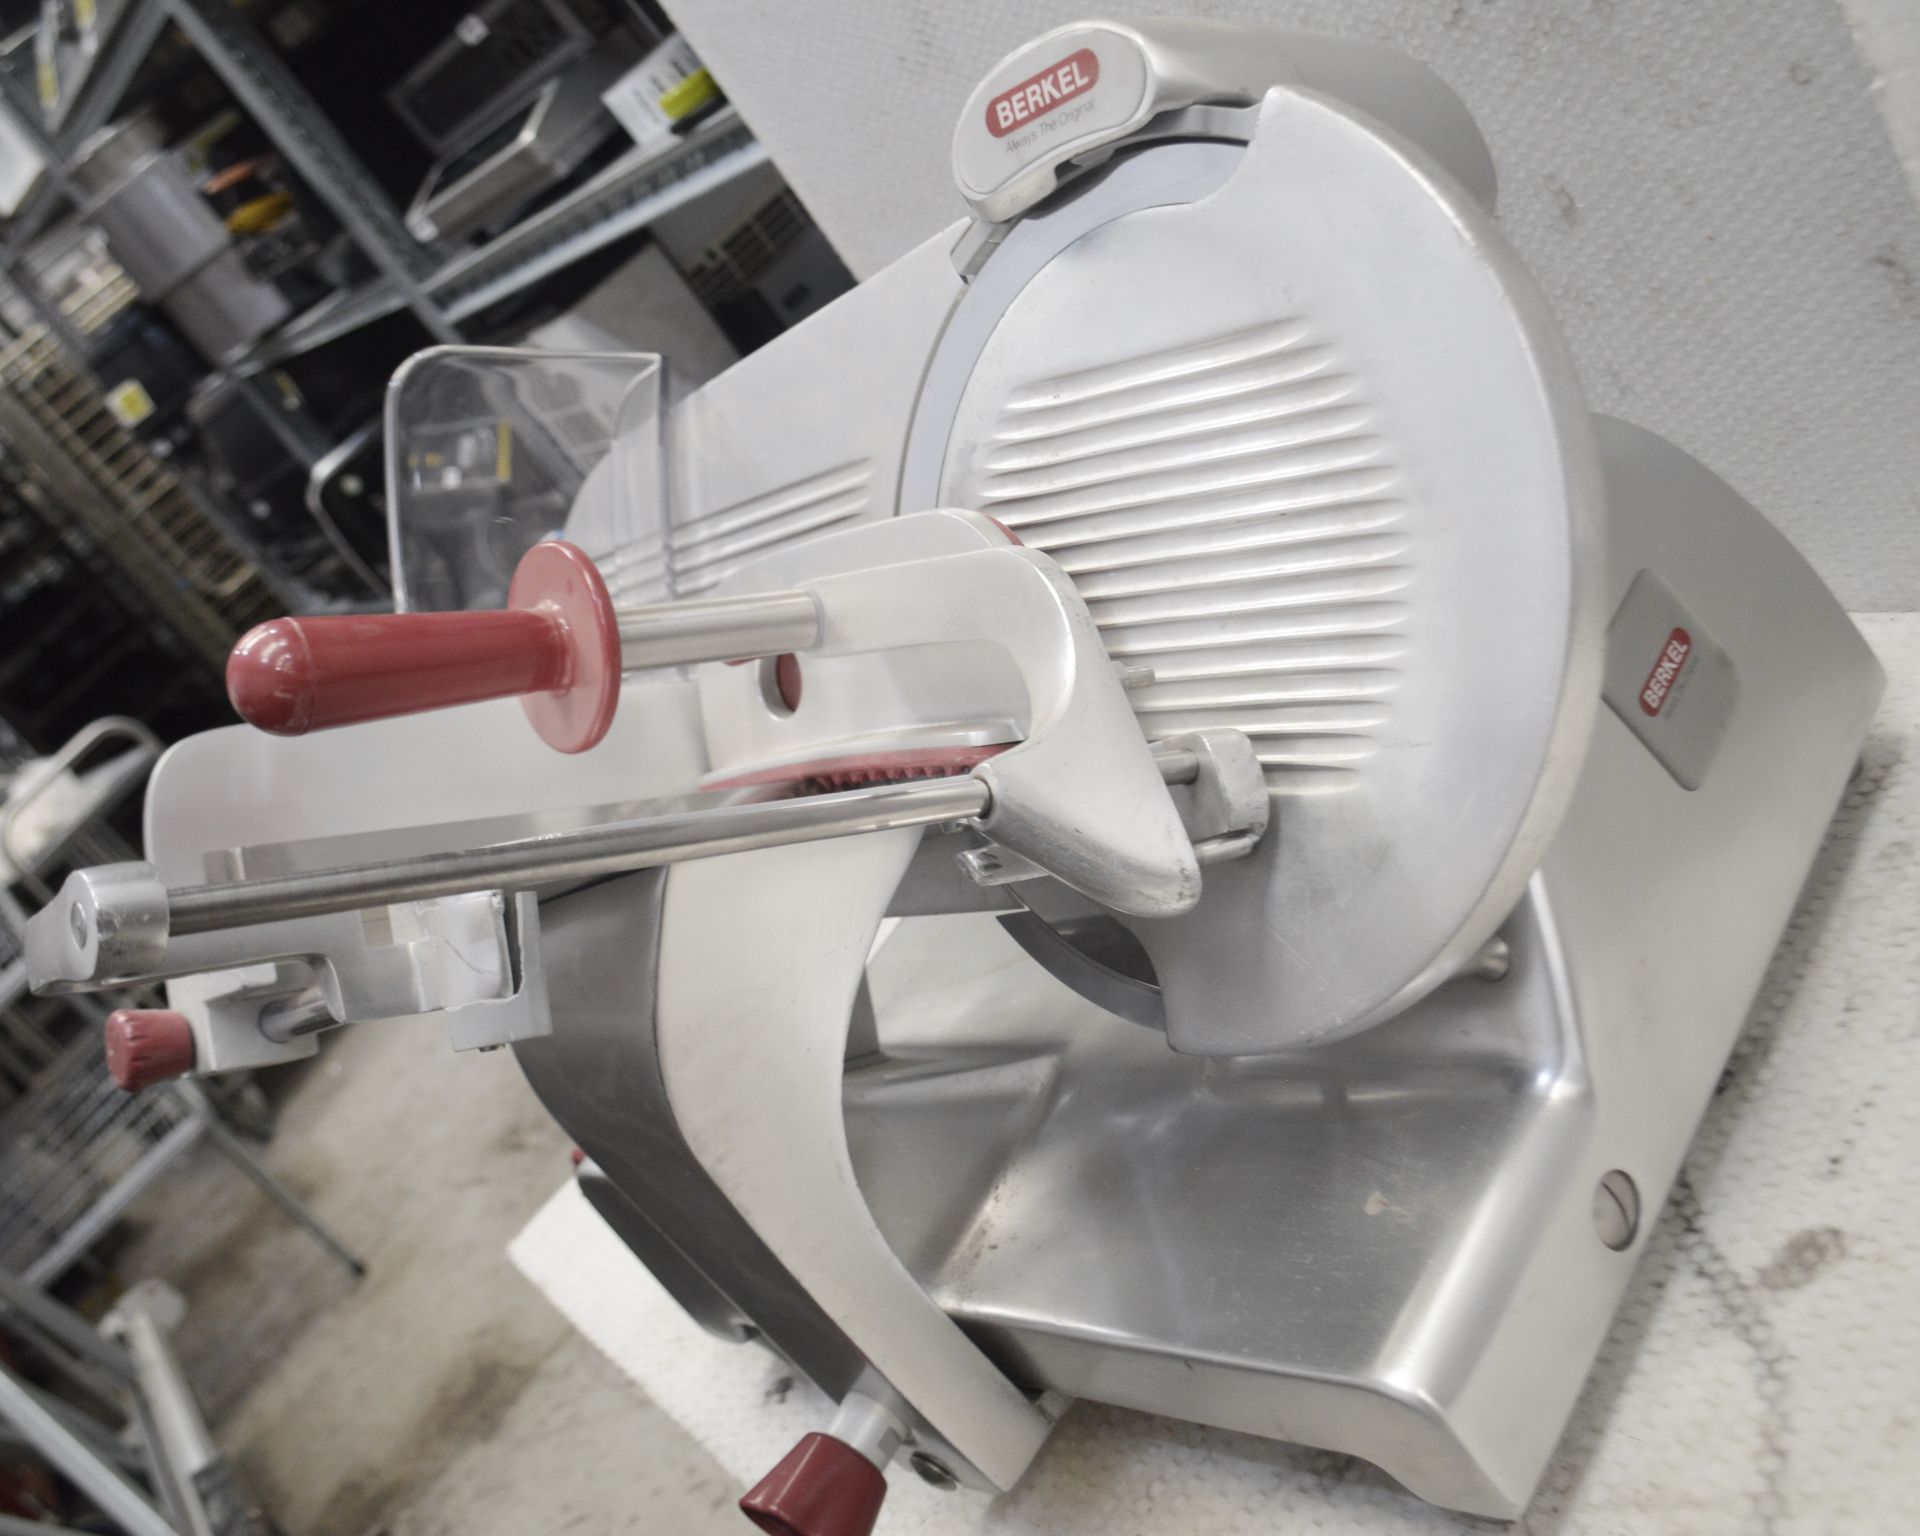 1 x Berkel 12" Commercial Cooked Meat / Bacon Slicer - 220-240v - Model BSPGL04011A0F - Approx - Image 2 of 4